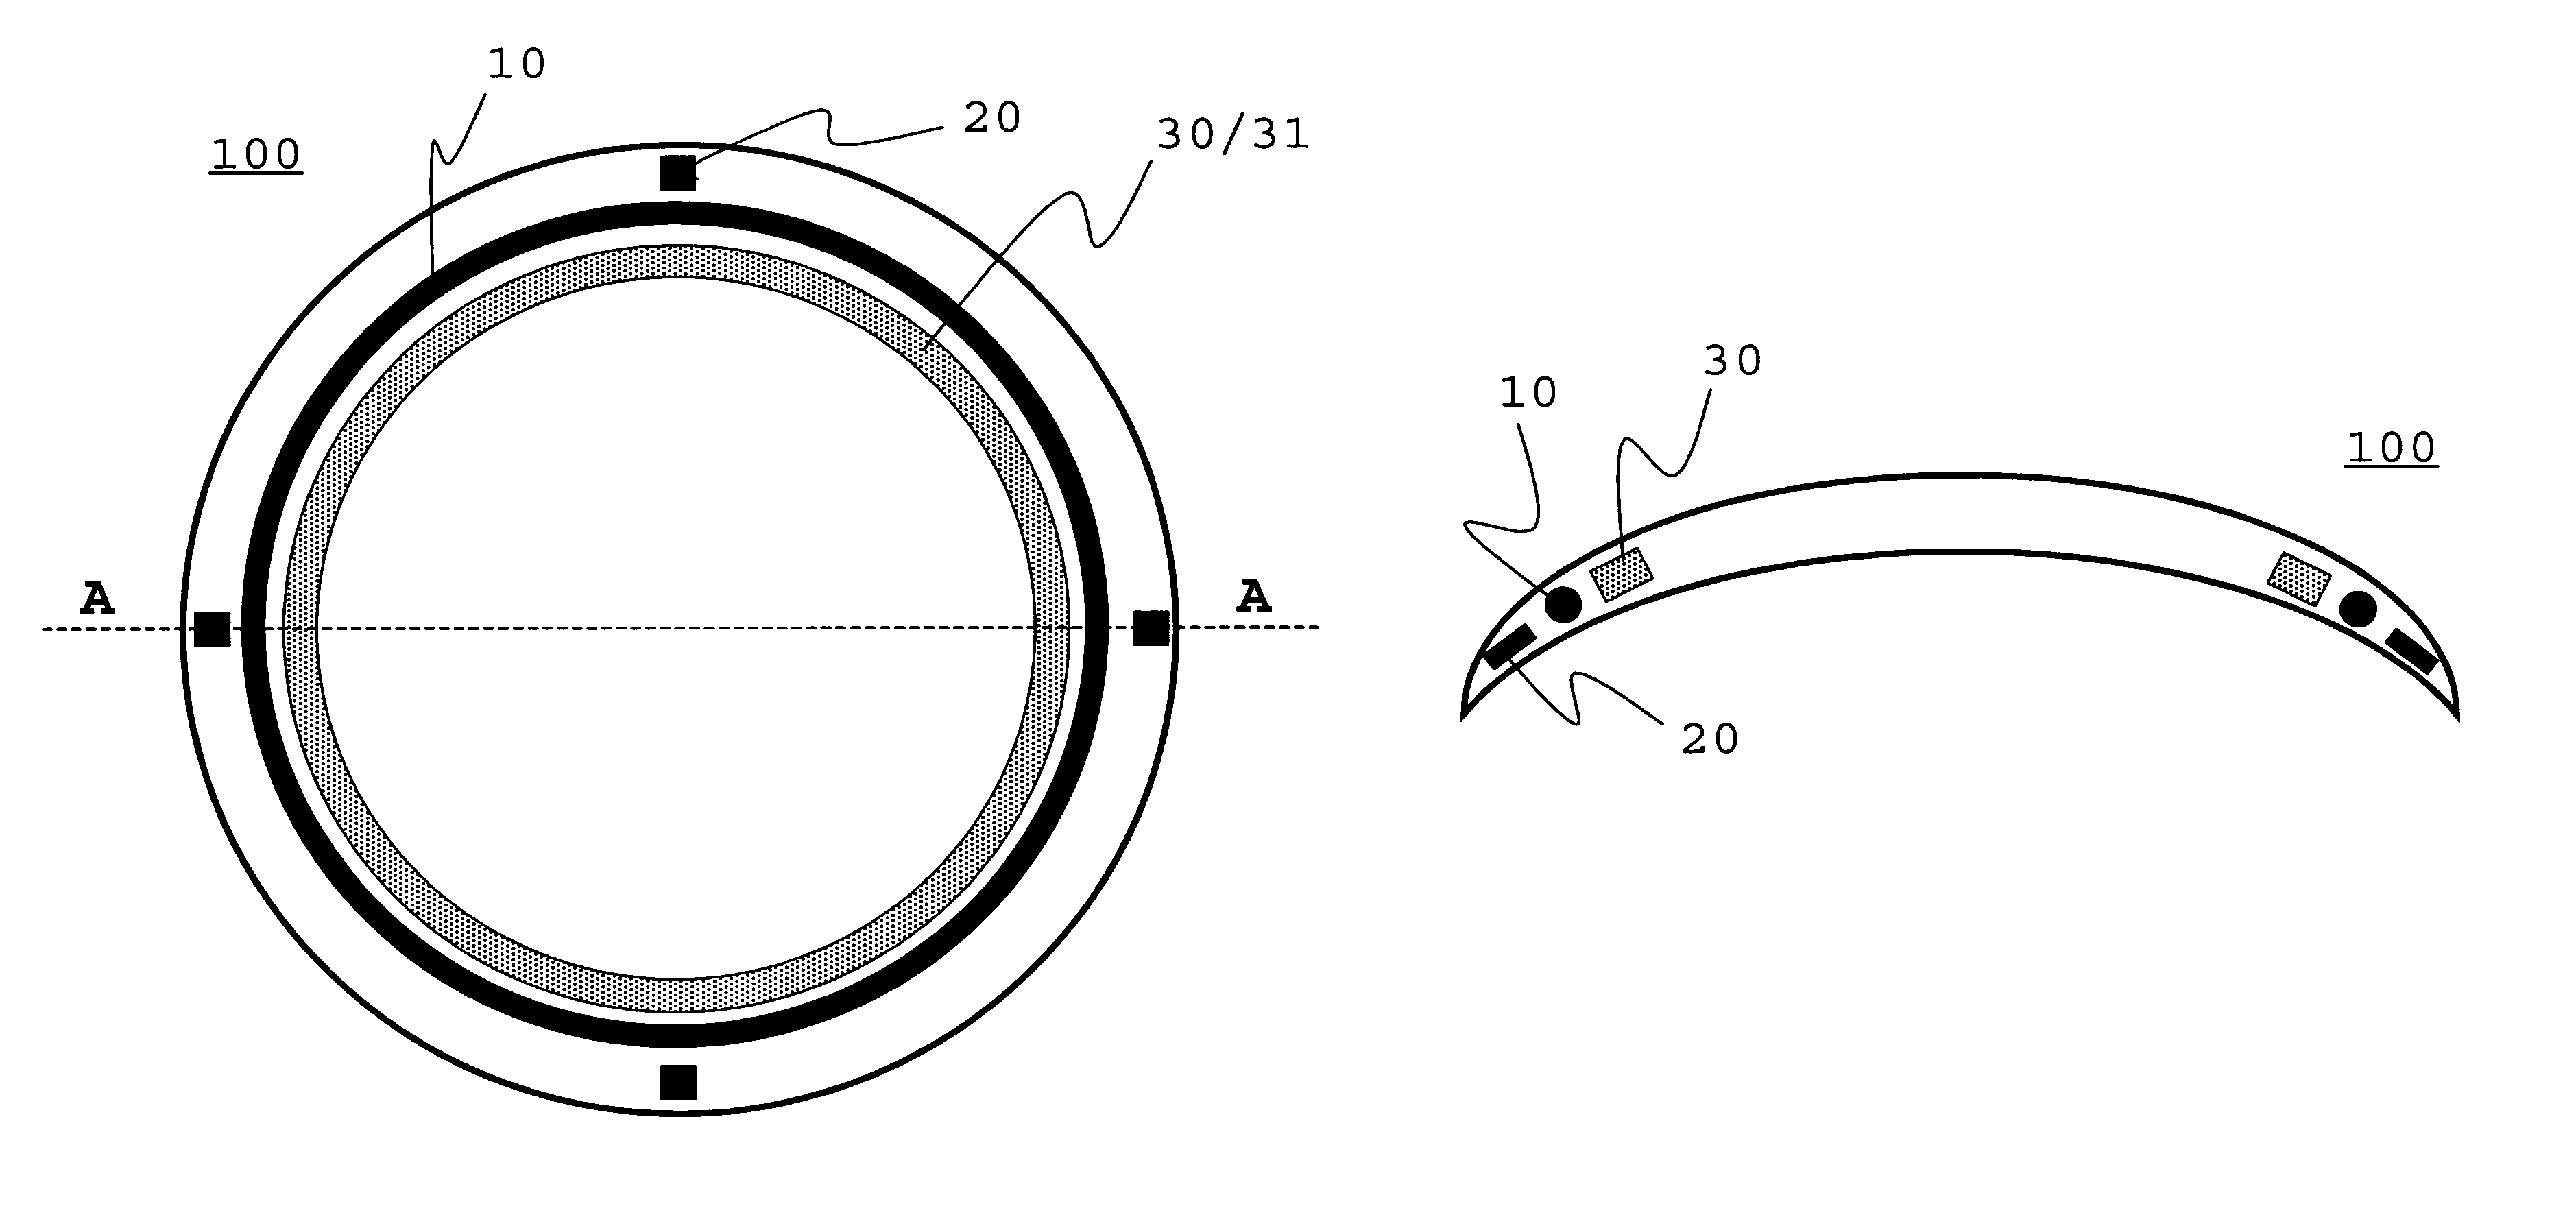 Lens with variable refraction power for the human eye